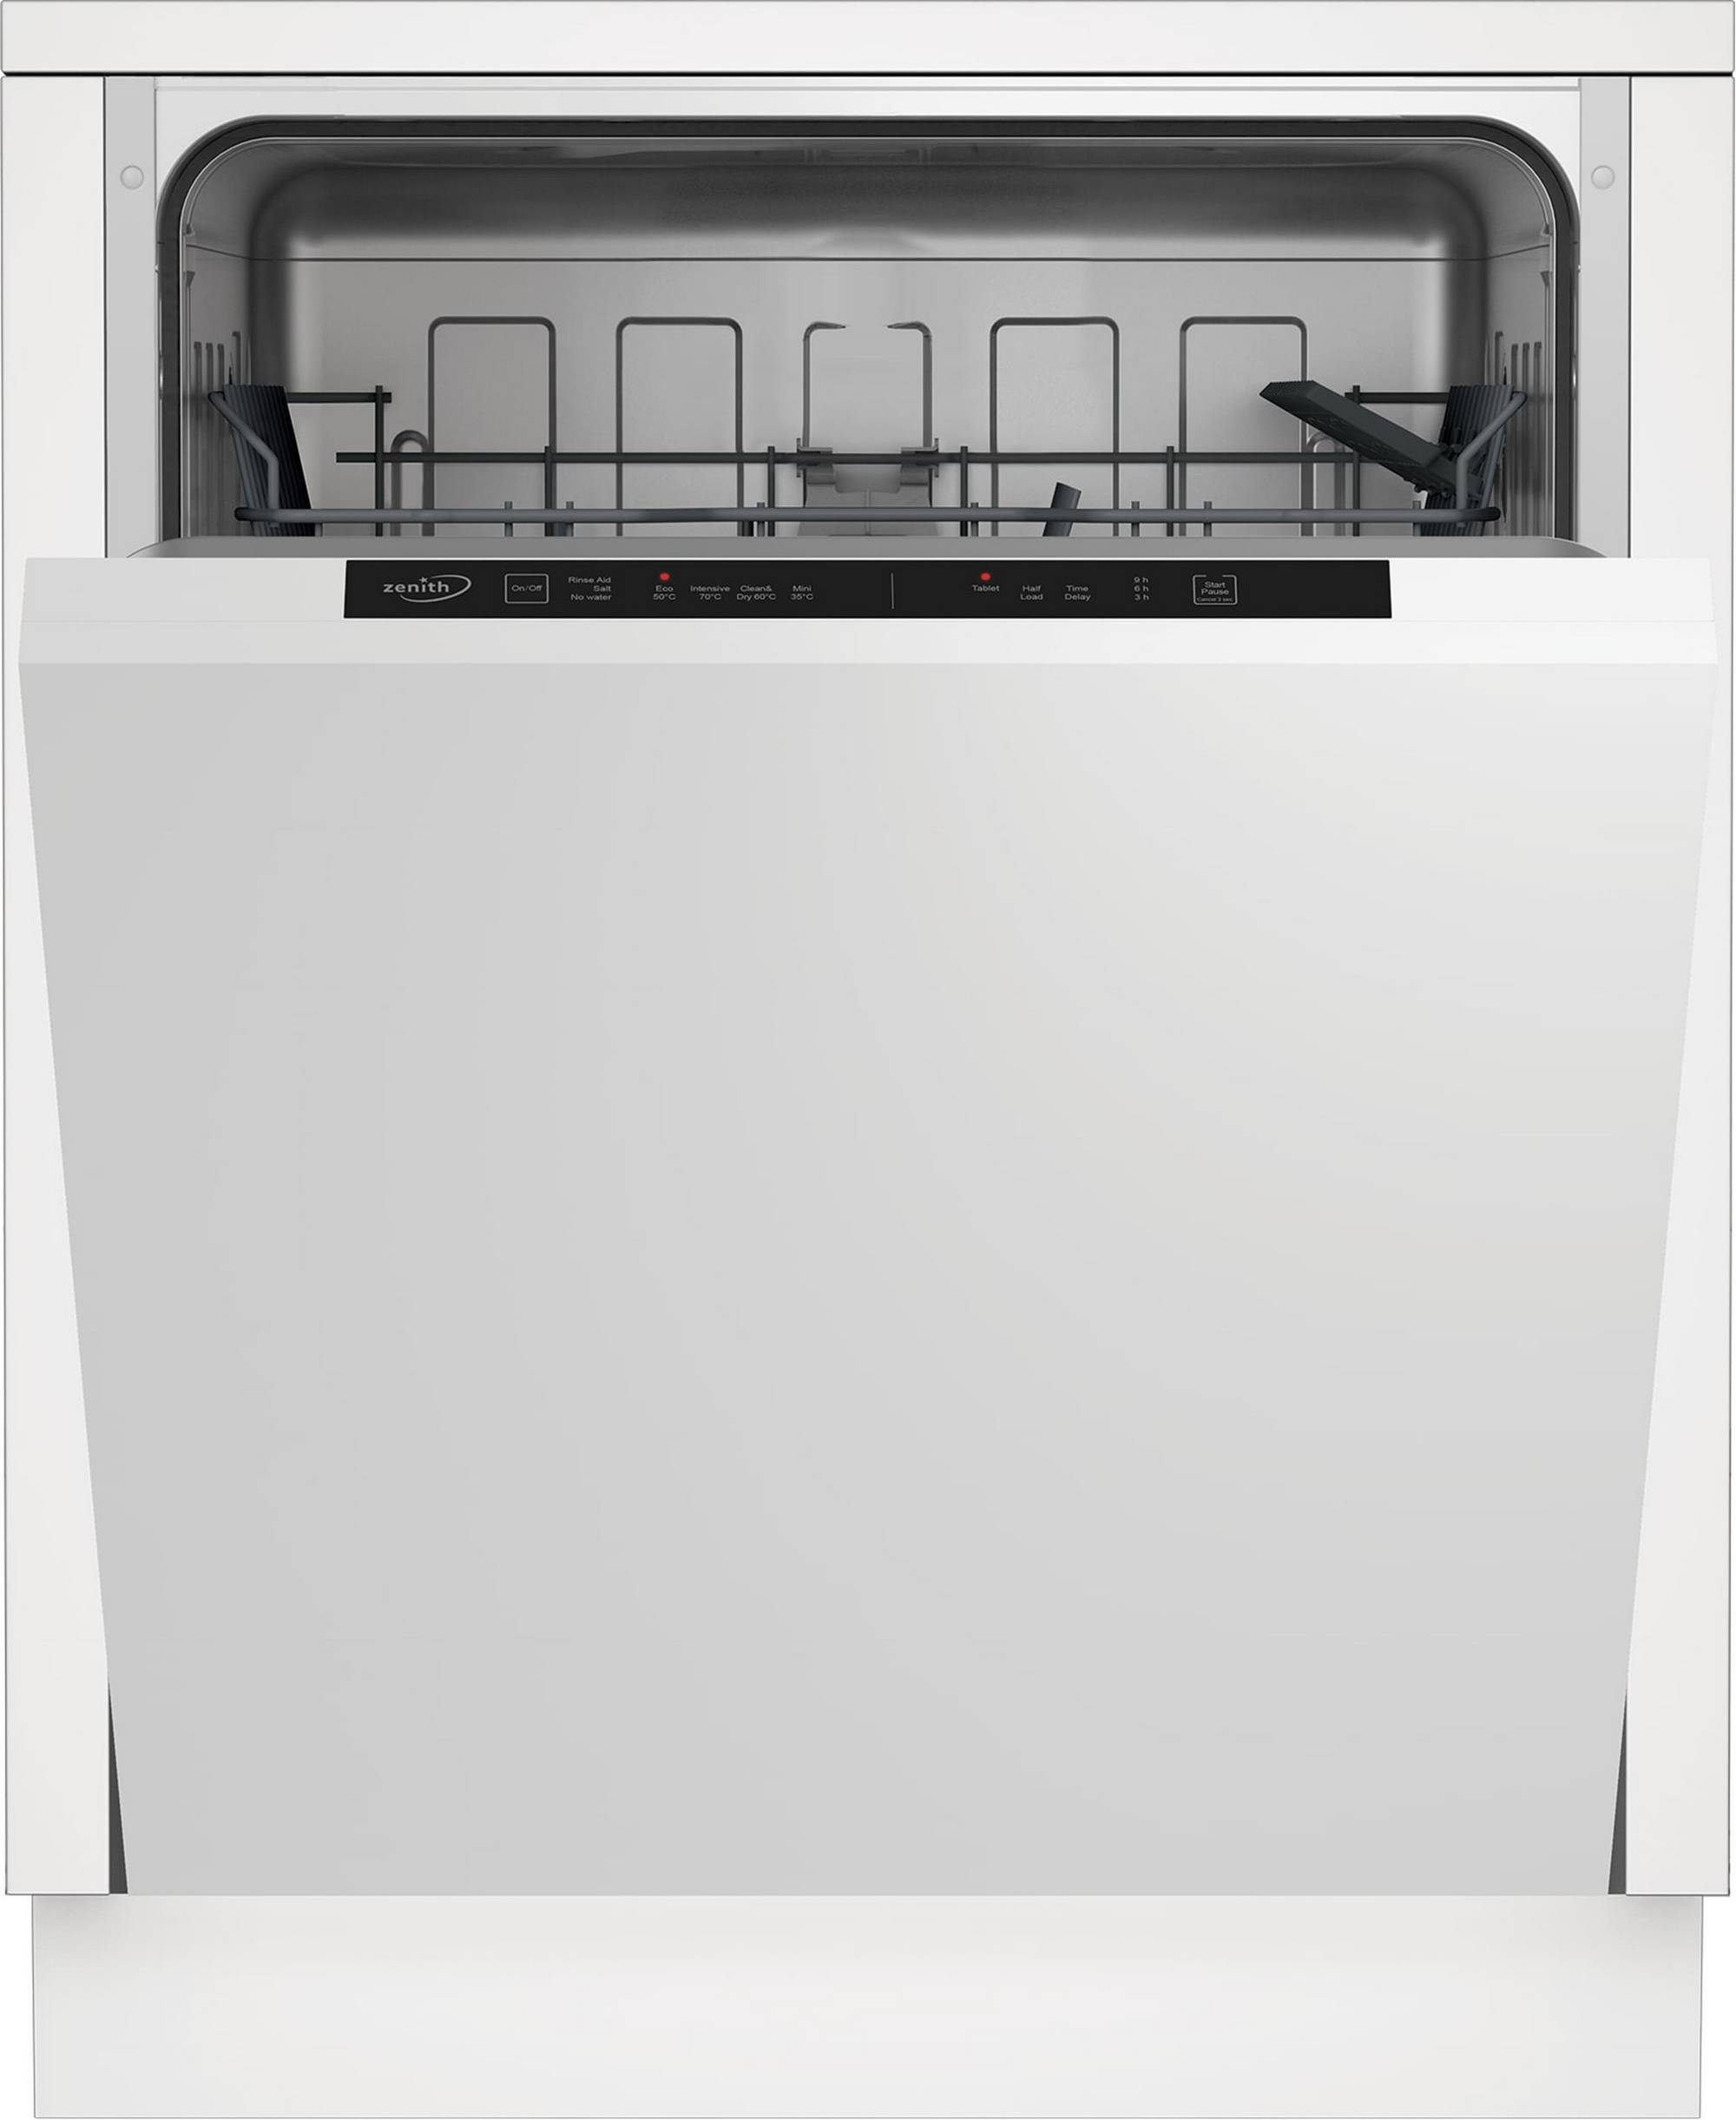 Zenith ZDWI600W Integrated Dishwasher Full Size 13 Place Setting A+ Energy Rated